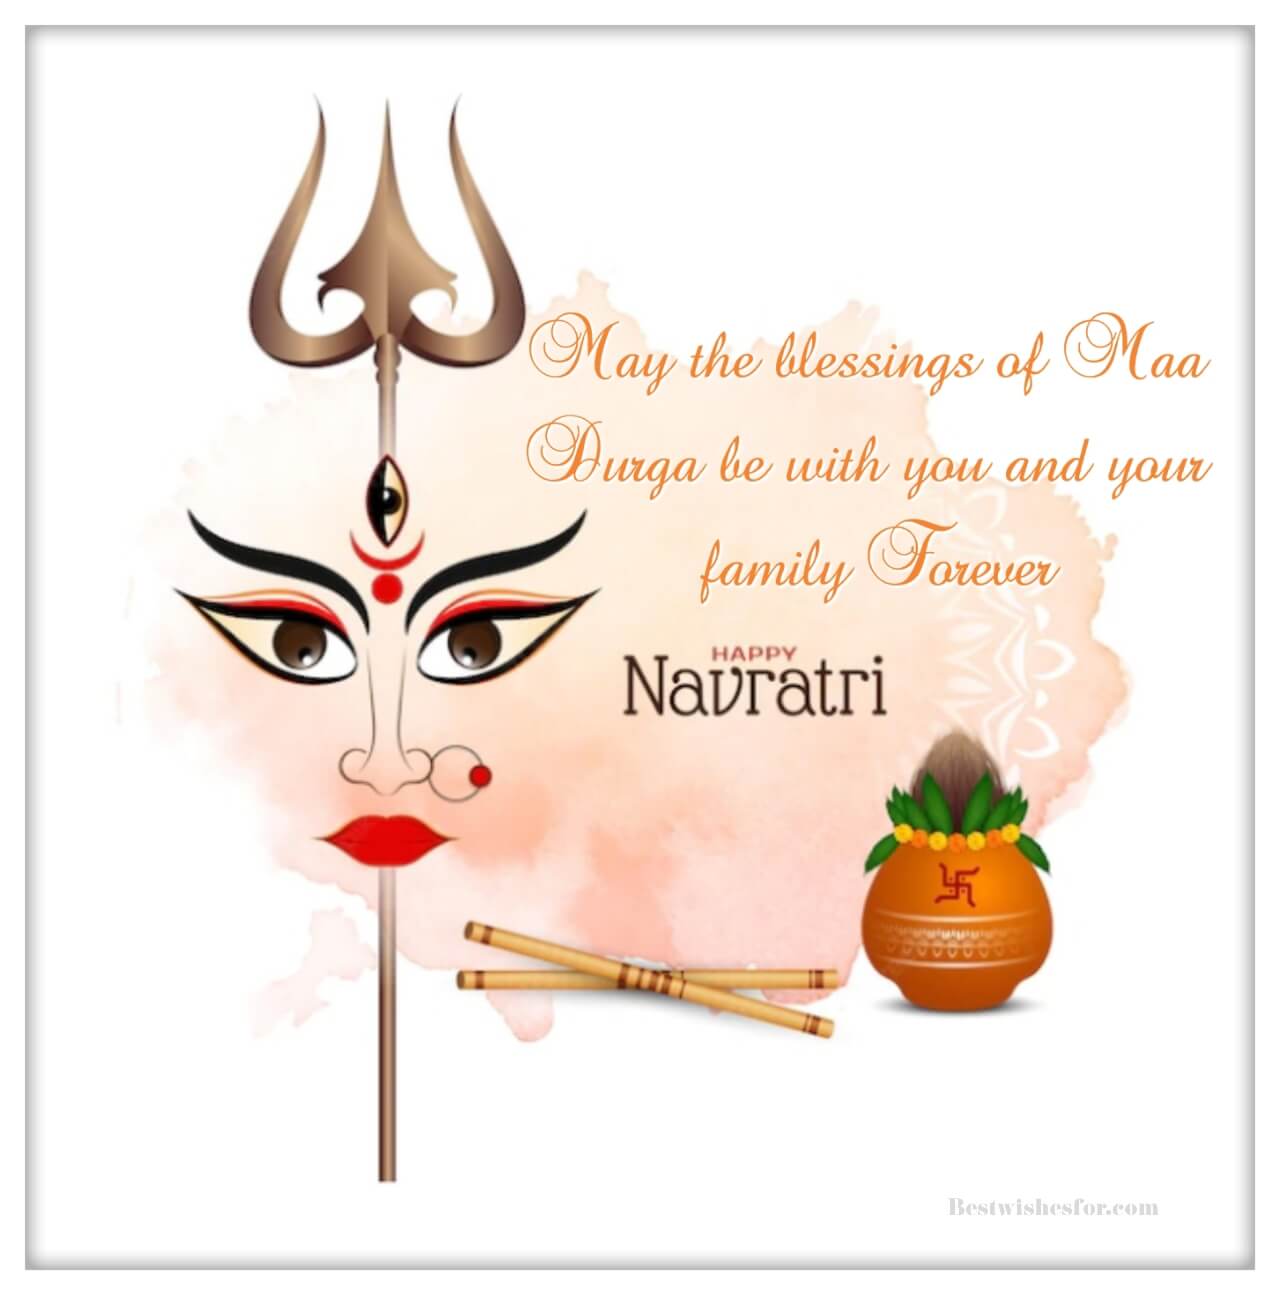 Happy Navratri Wishes Images | Best Wishes